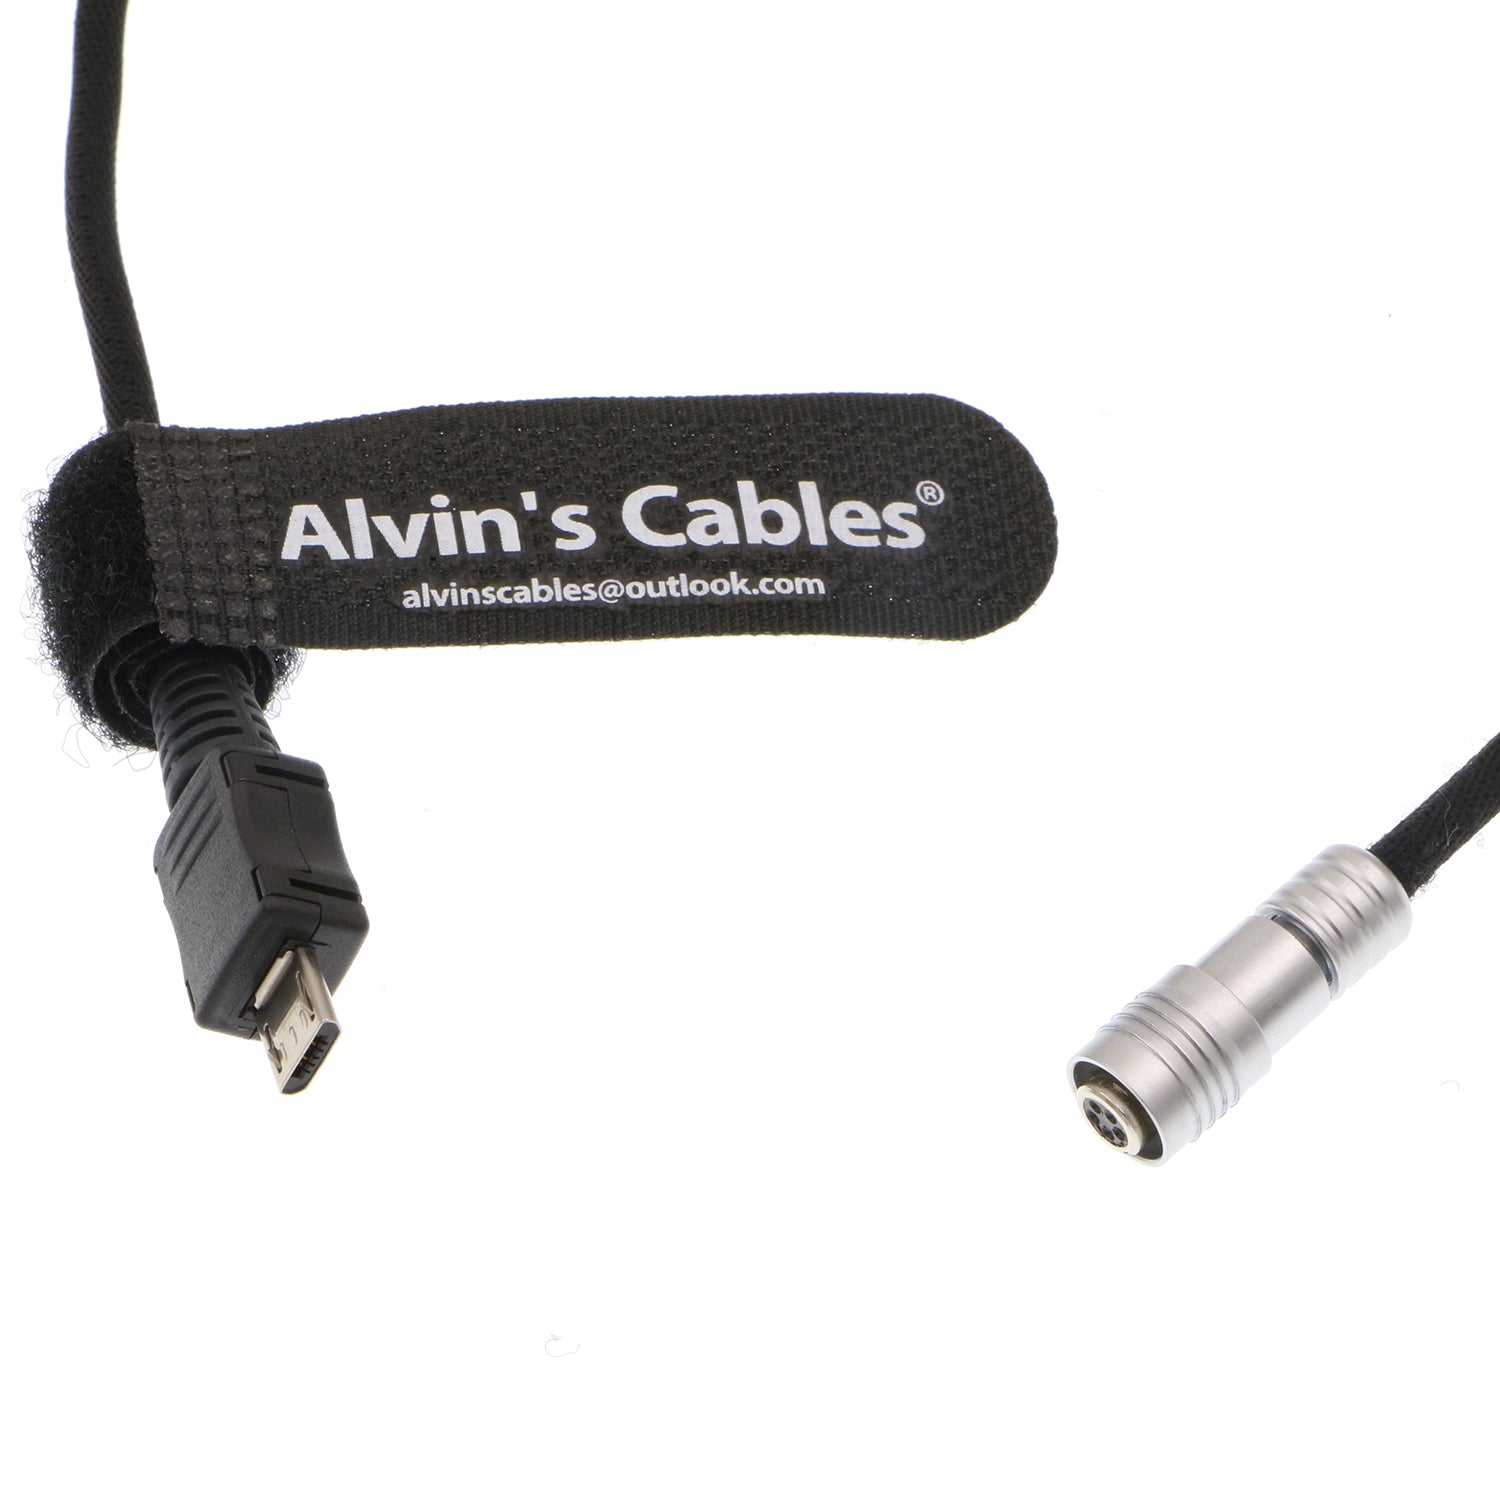 Alvin’s Cables Portkeys Keygrip Handle Control Cable for Tilta Nucleus Nano 5 Pin Female to Micro USB Control Braided Wire